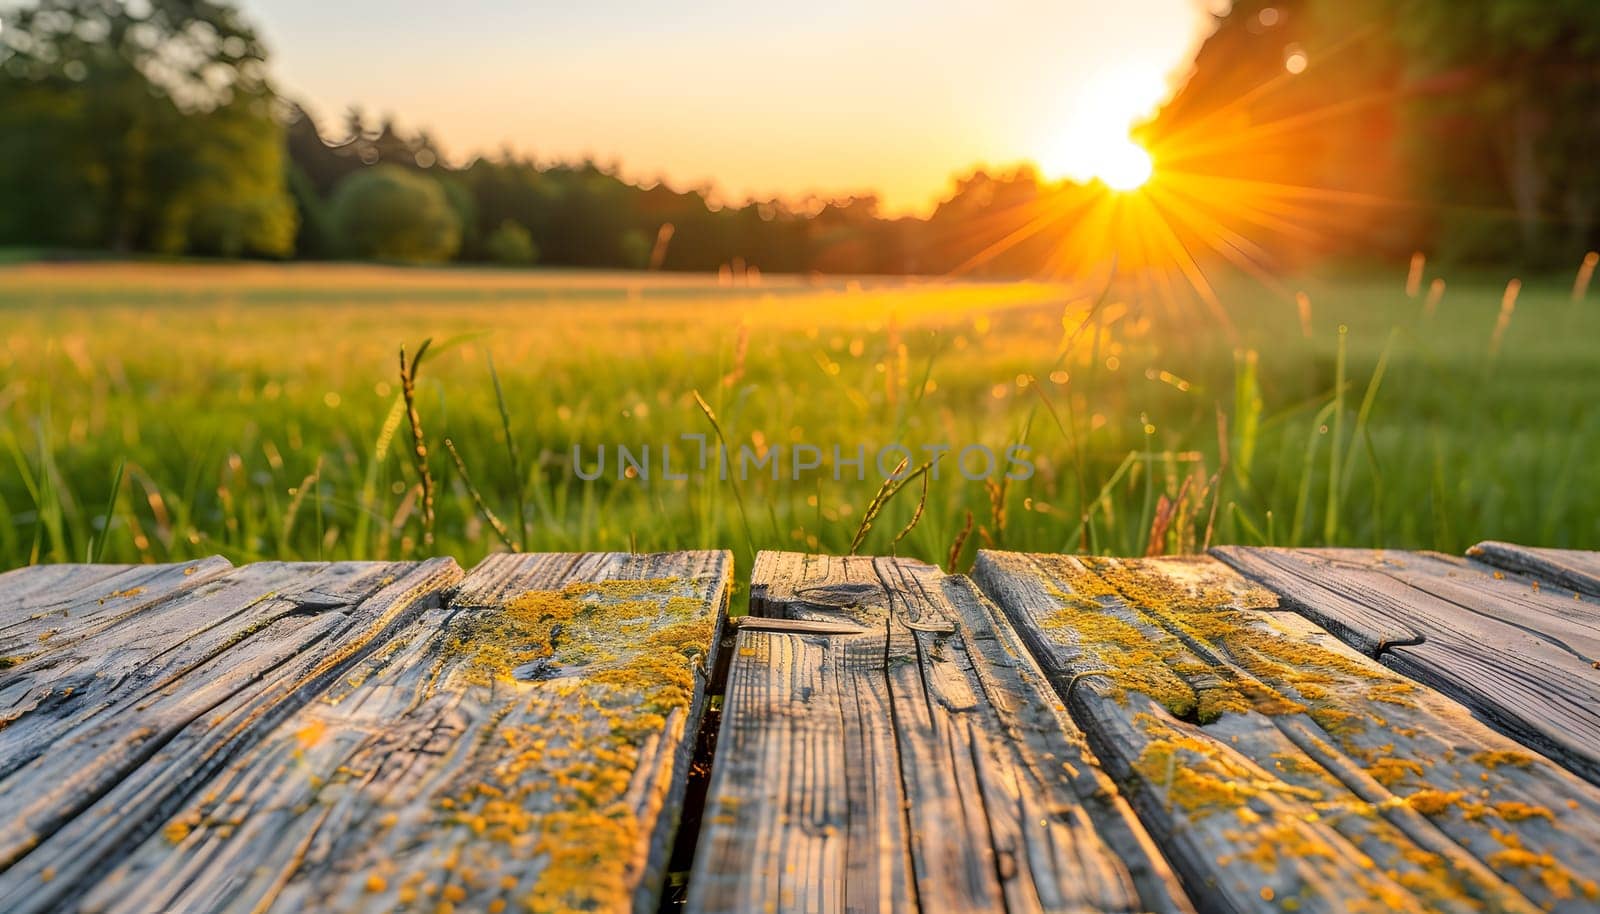 the sun is setting over a grassy field and a wooden deck in the foreground by Nadtochiy